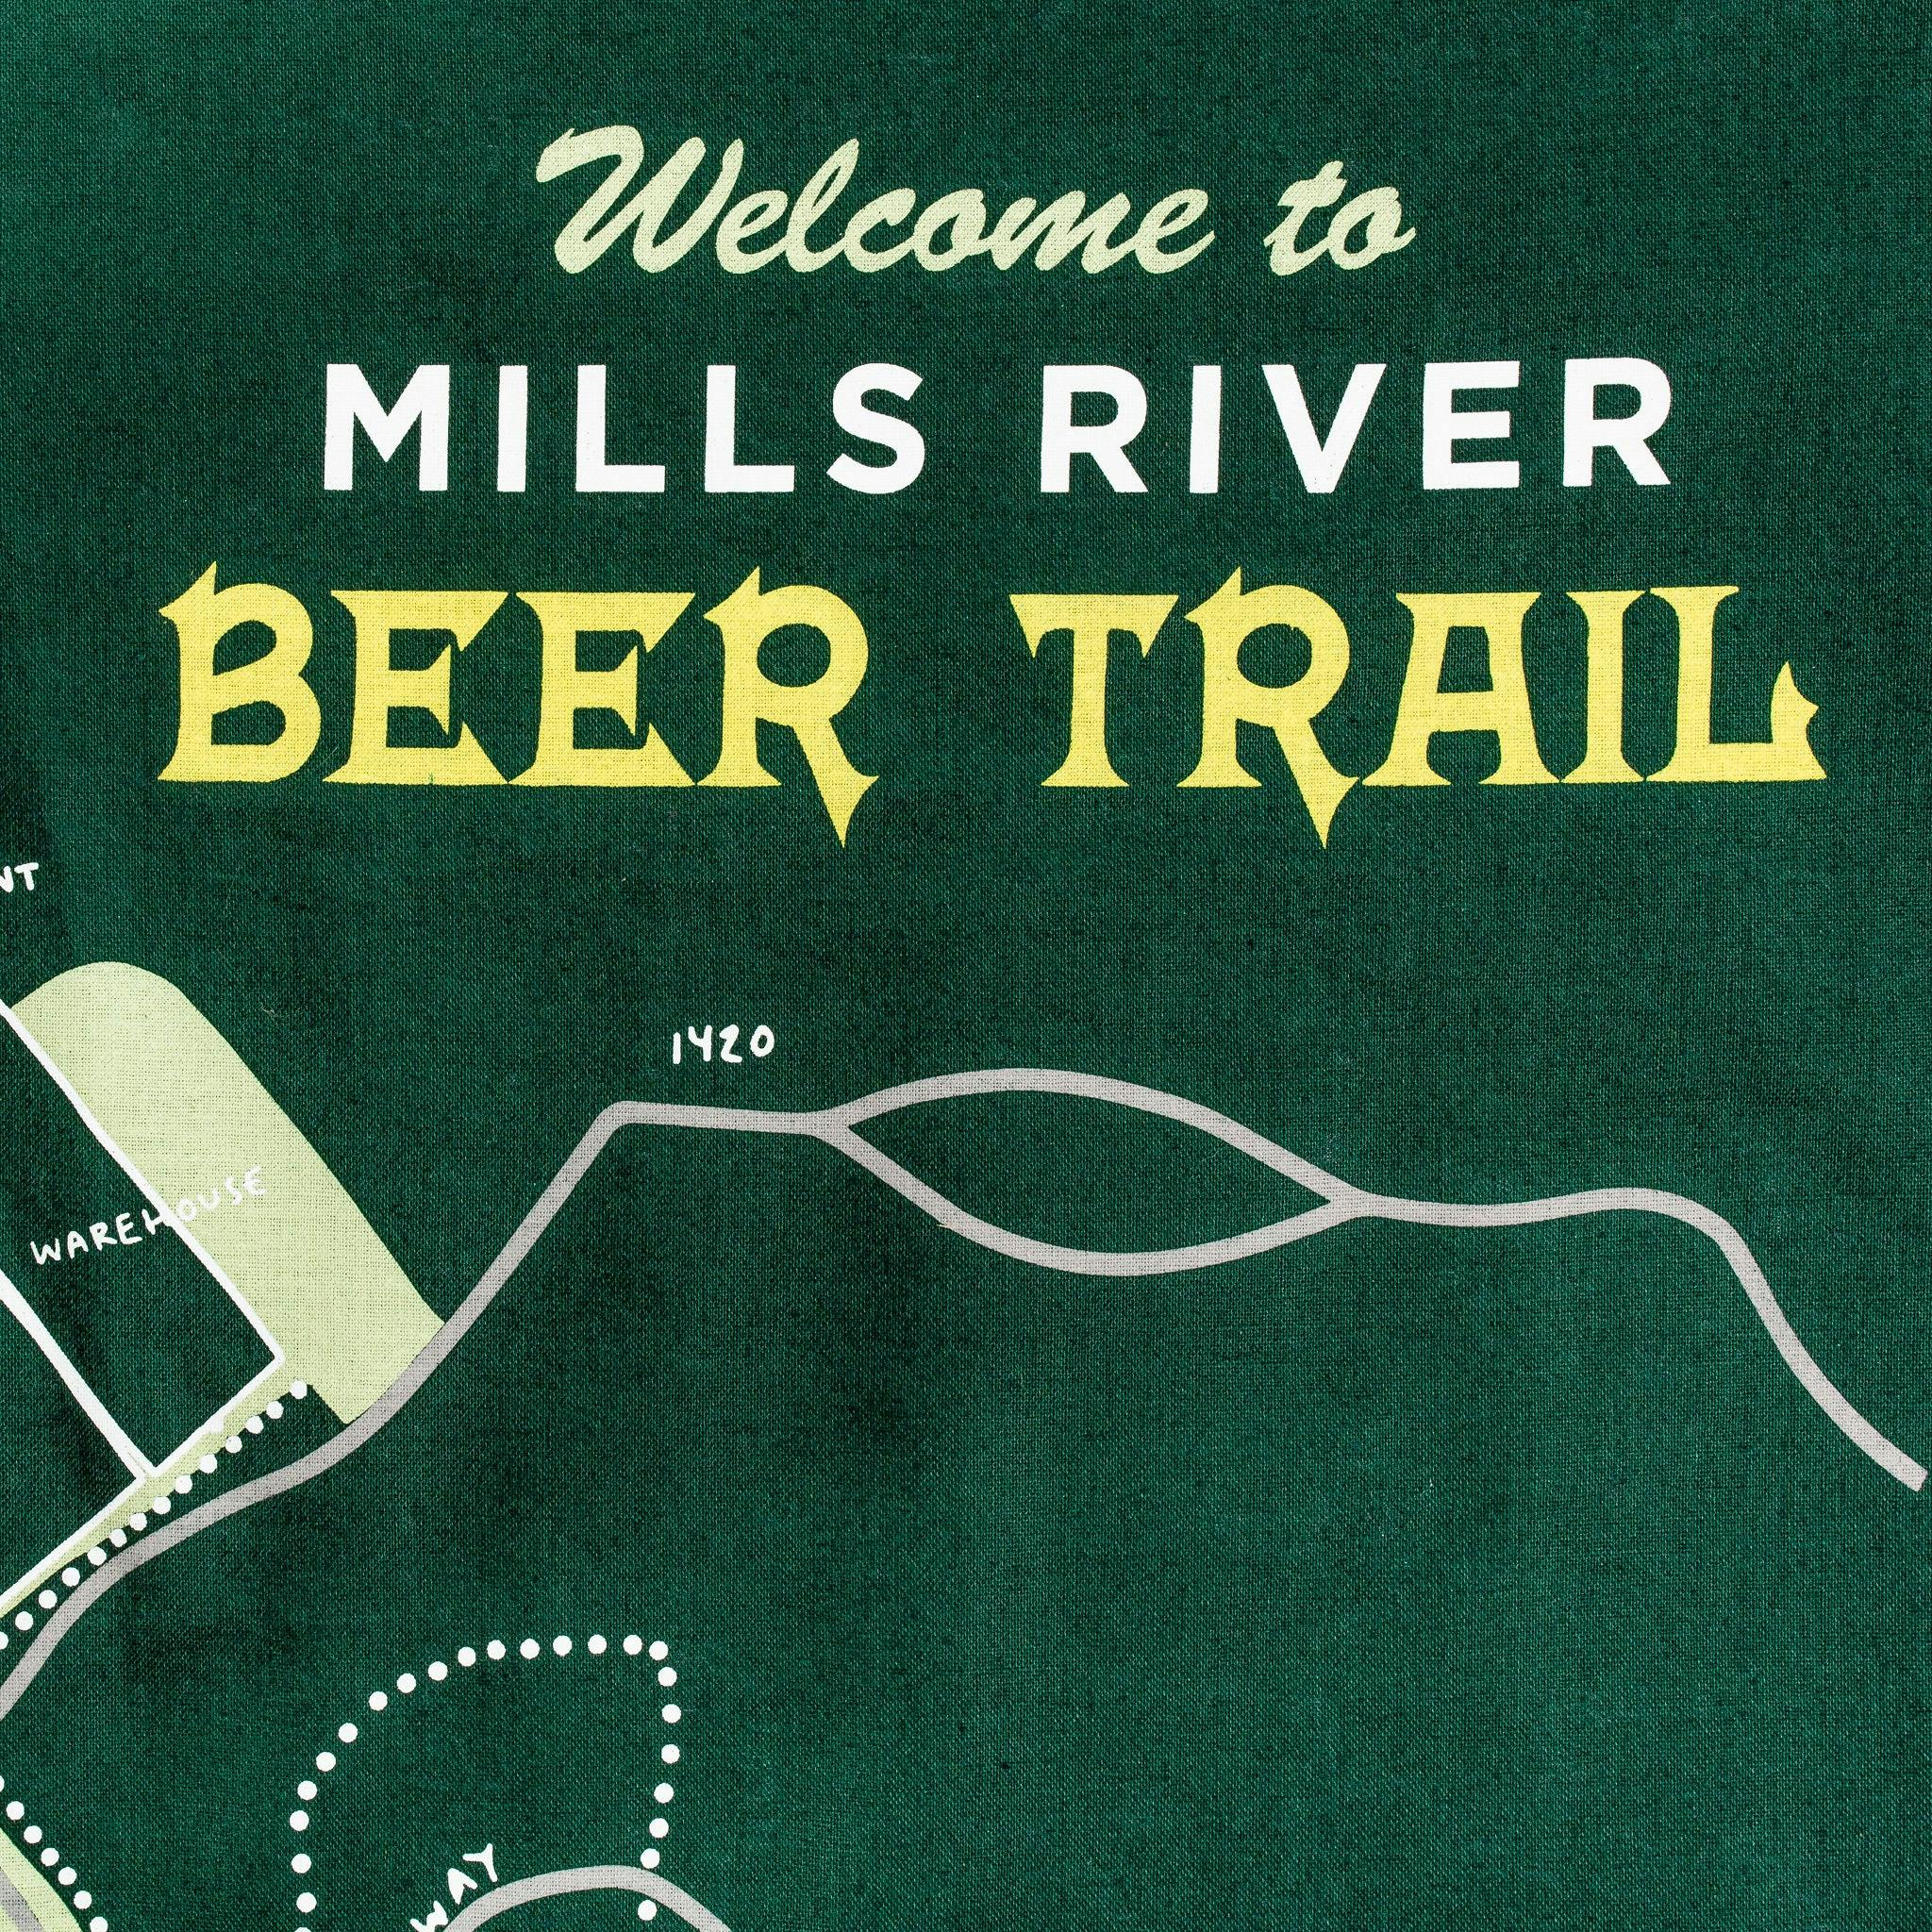 Sierra Nevada Mills River Trail Map Bandana - up close view of Beer Trail printed pattern